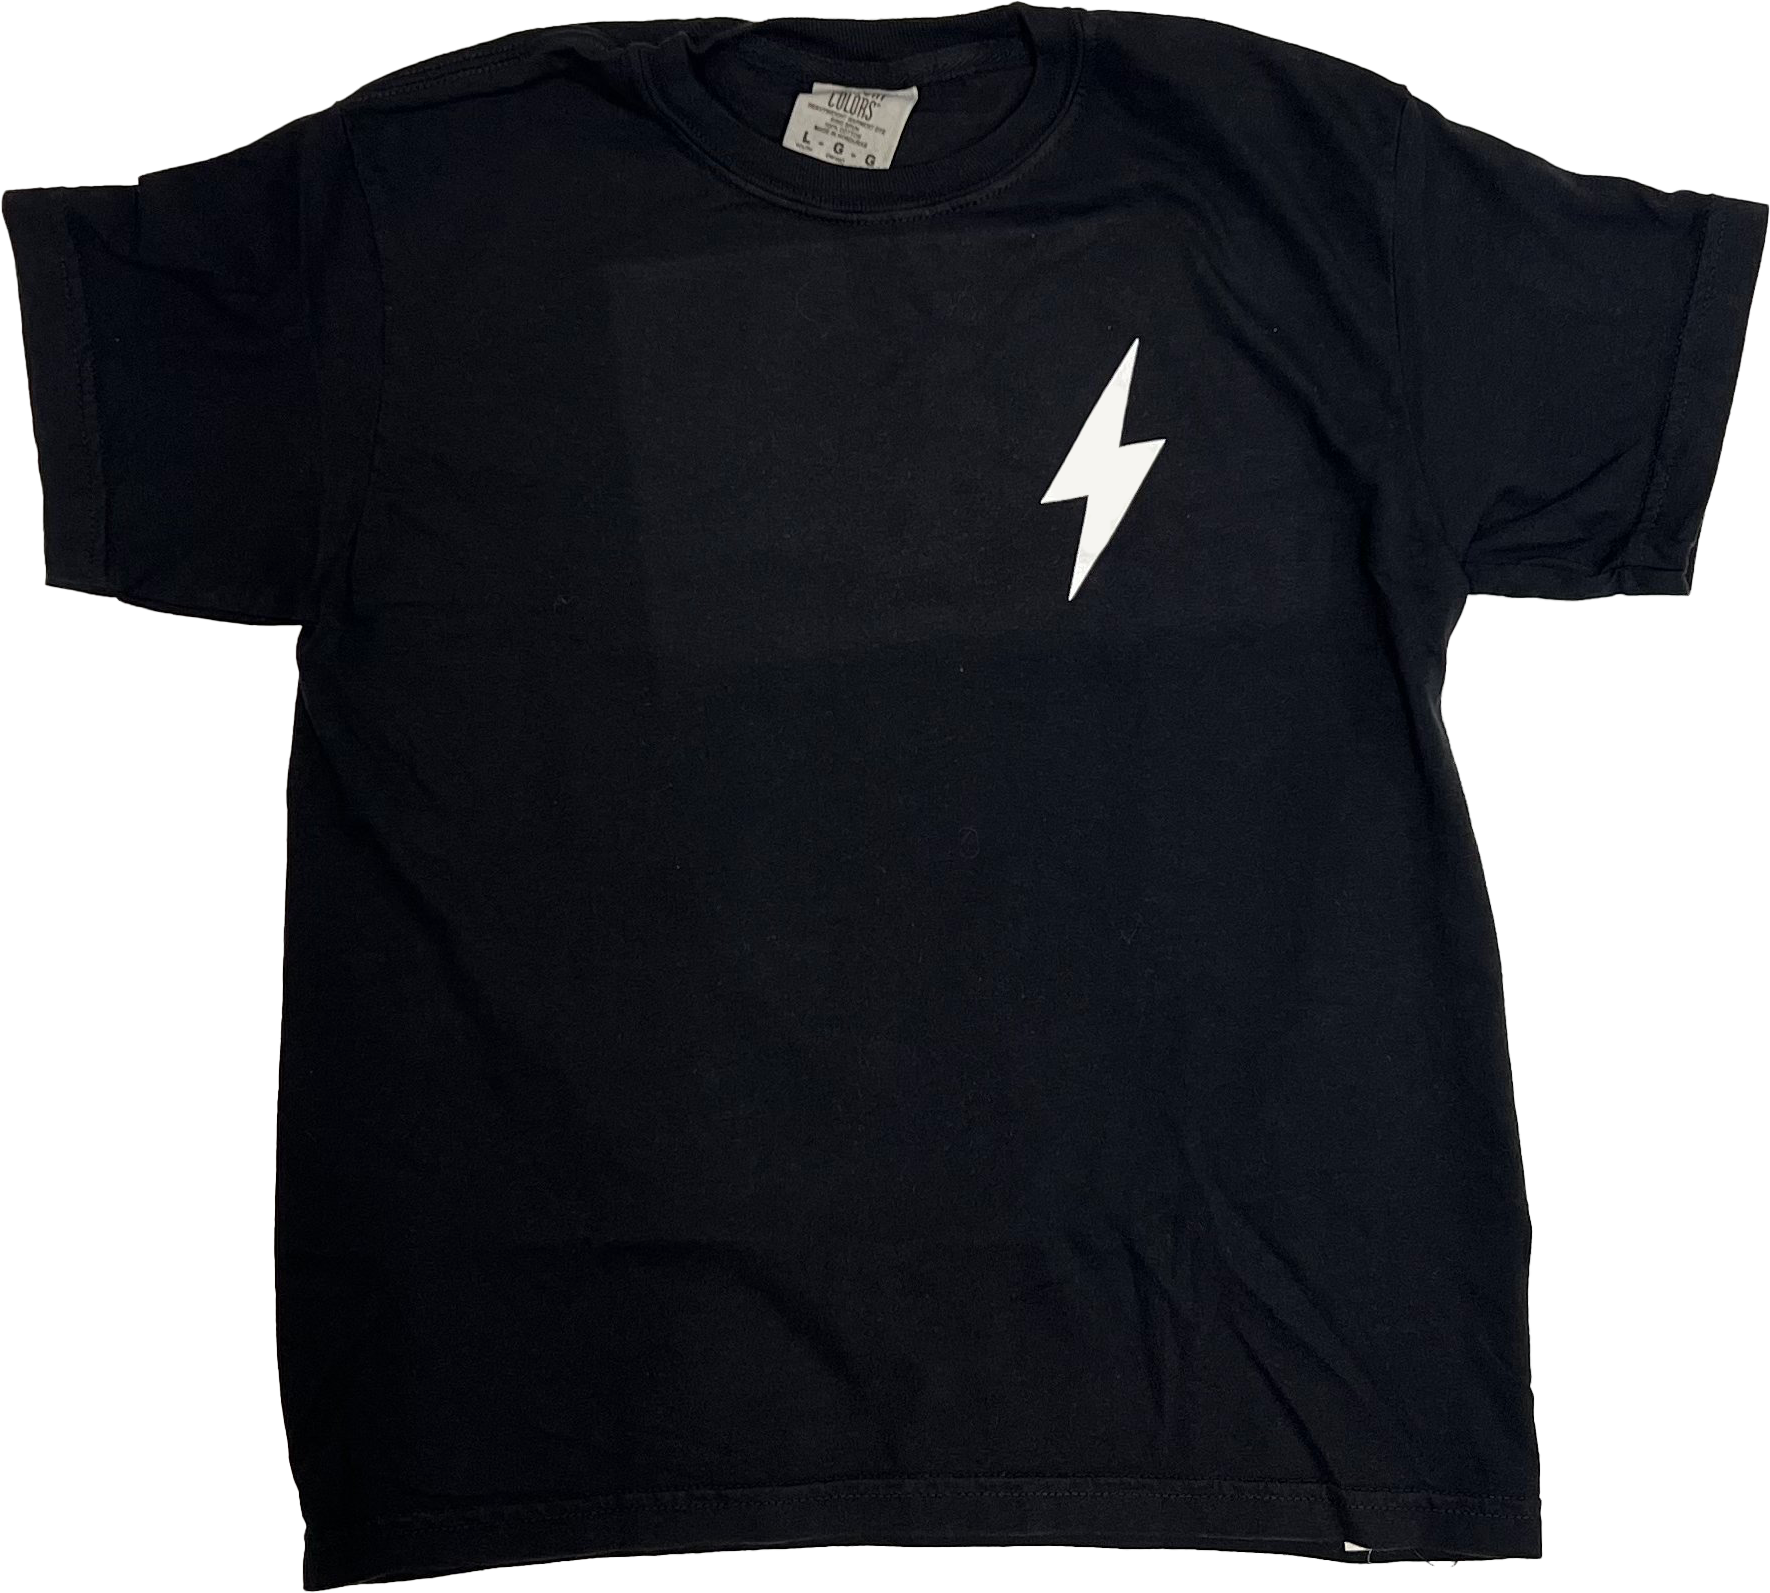 A black Youth Choose901 Lightning Smiley on Black shirt laid flat with a white lightning bolt design on the front from Choose901 Merch Shop.